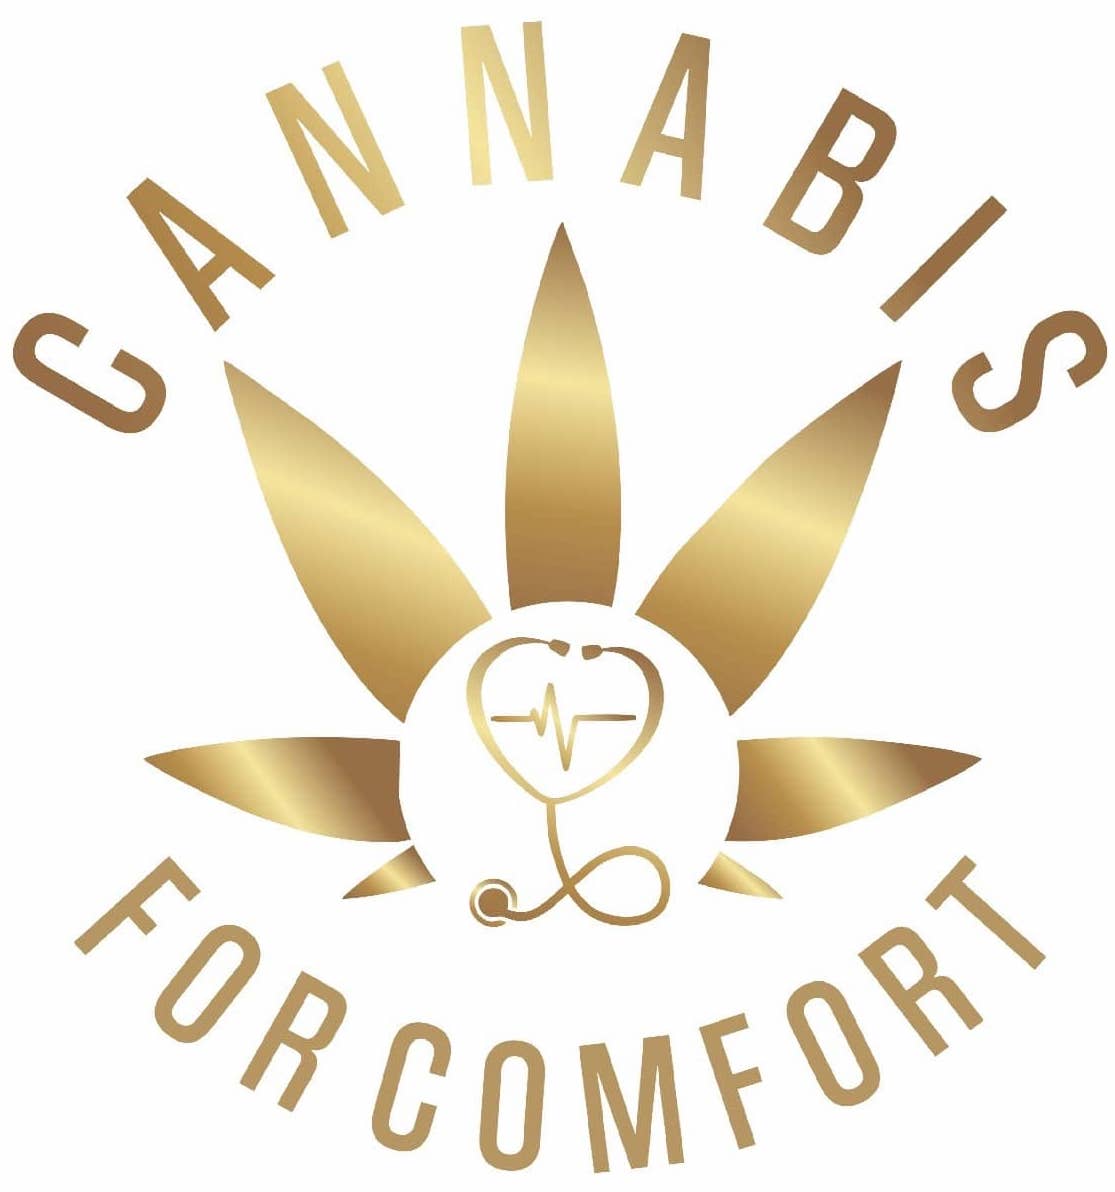 Cannabis for Comfort